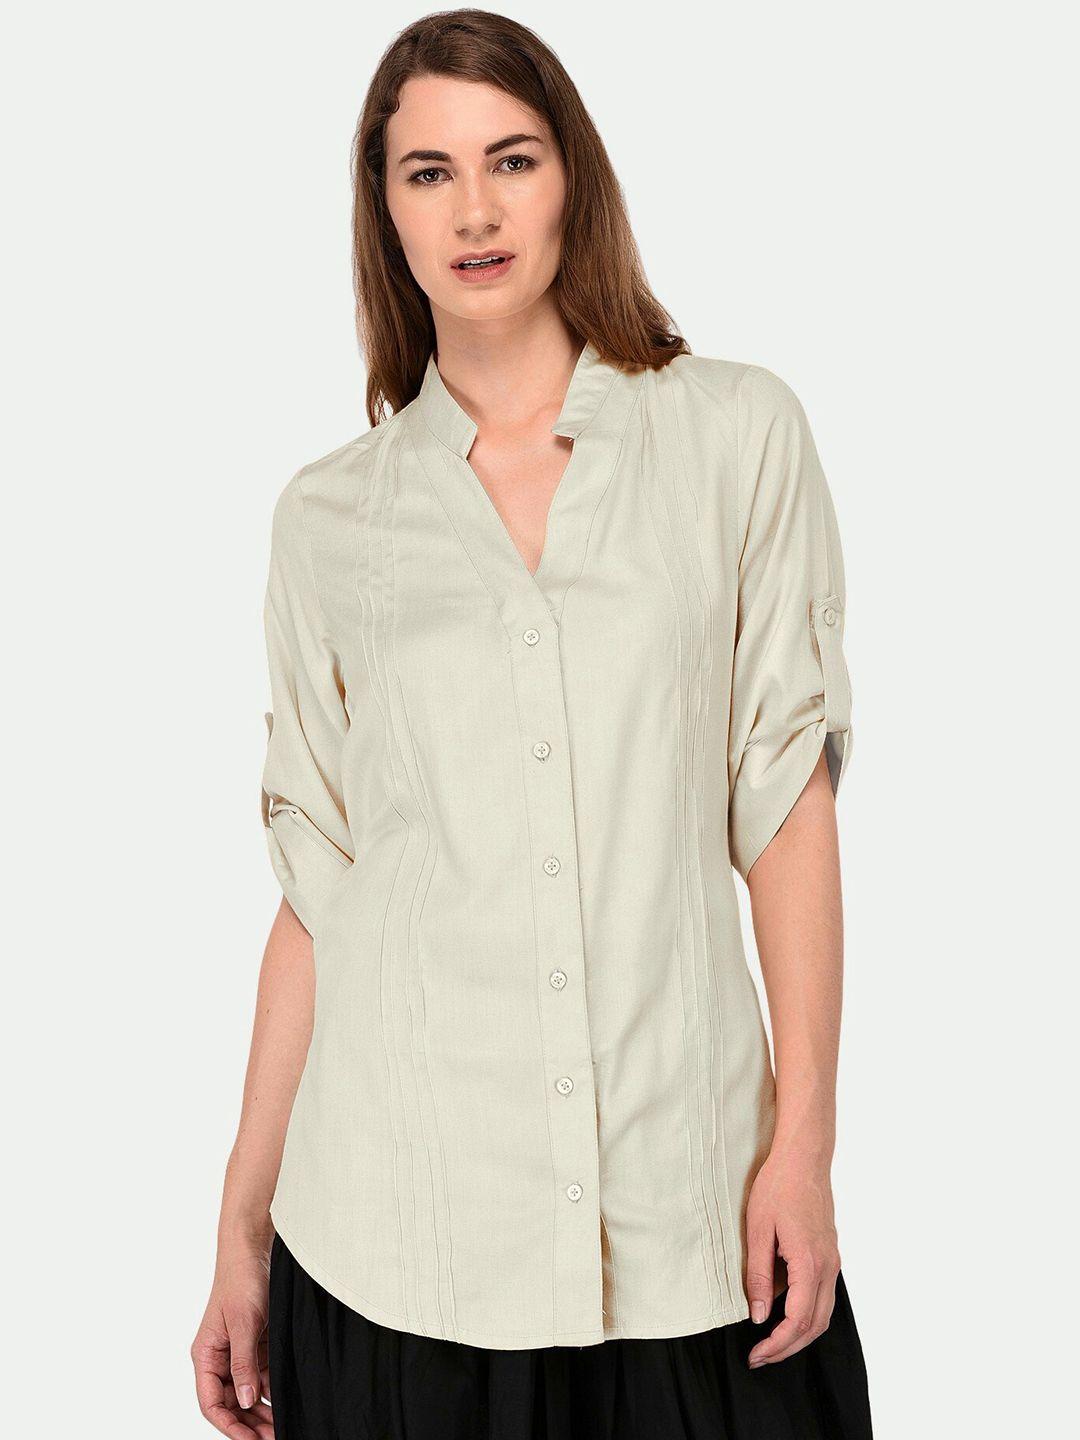 patrorna-women-off-white-comfort-casual-antimicrobial-shirt